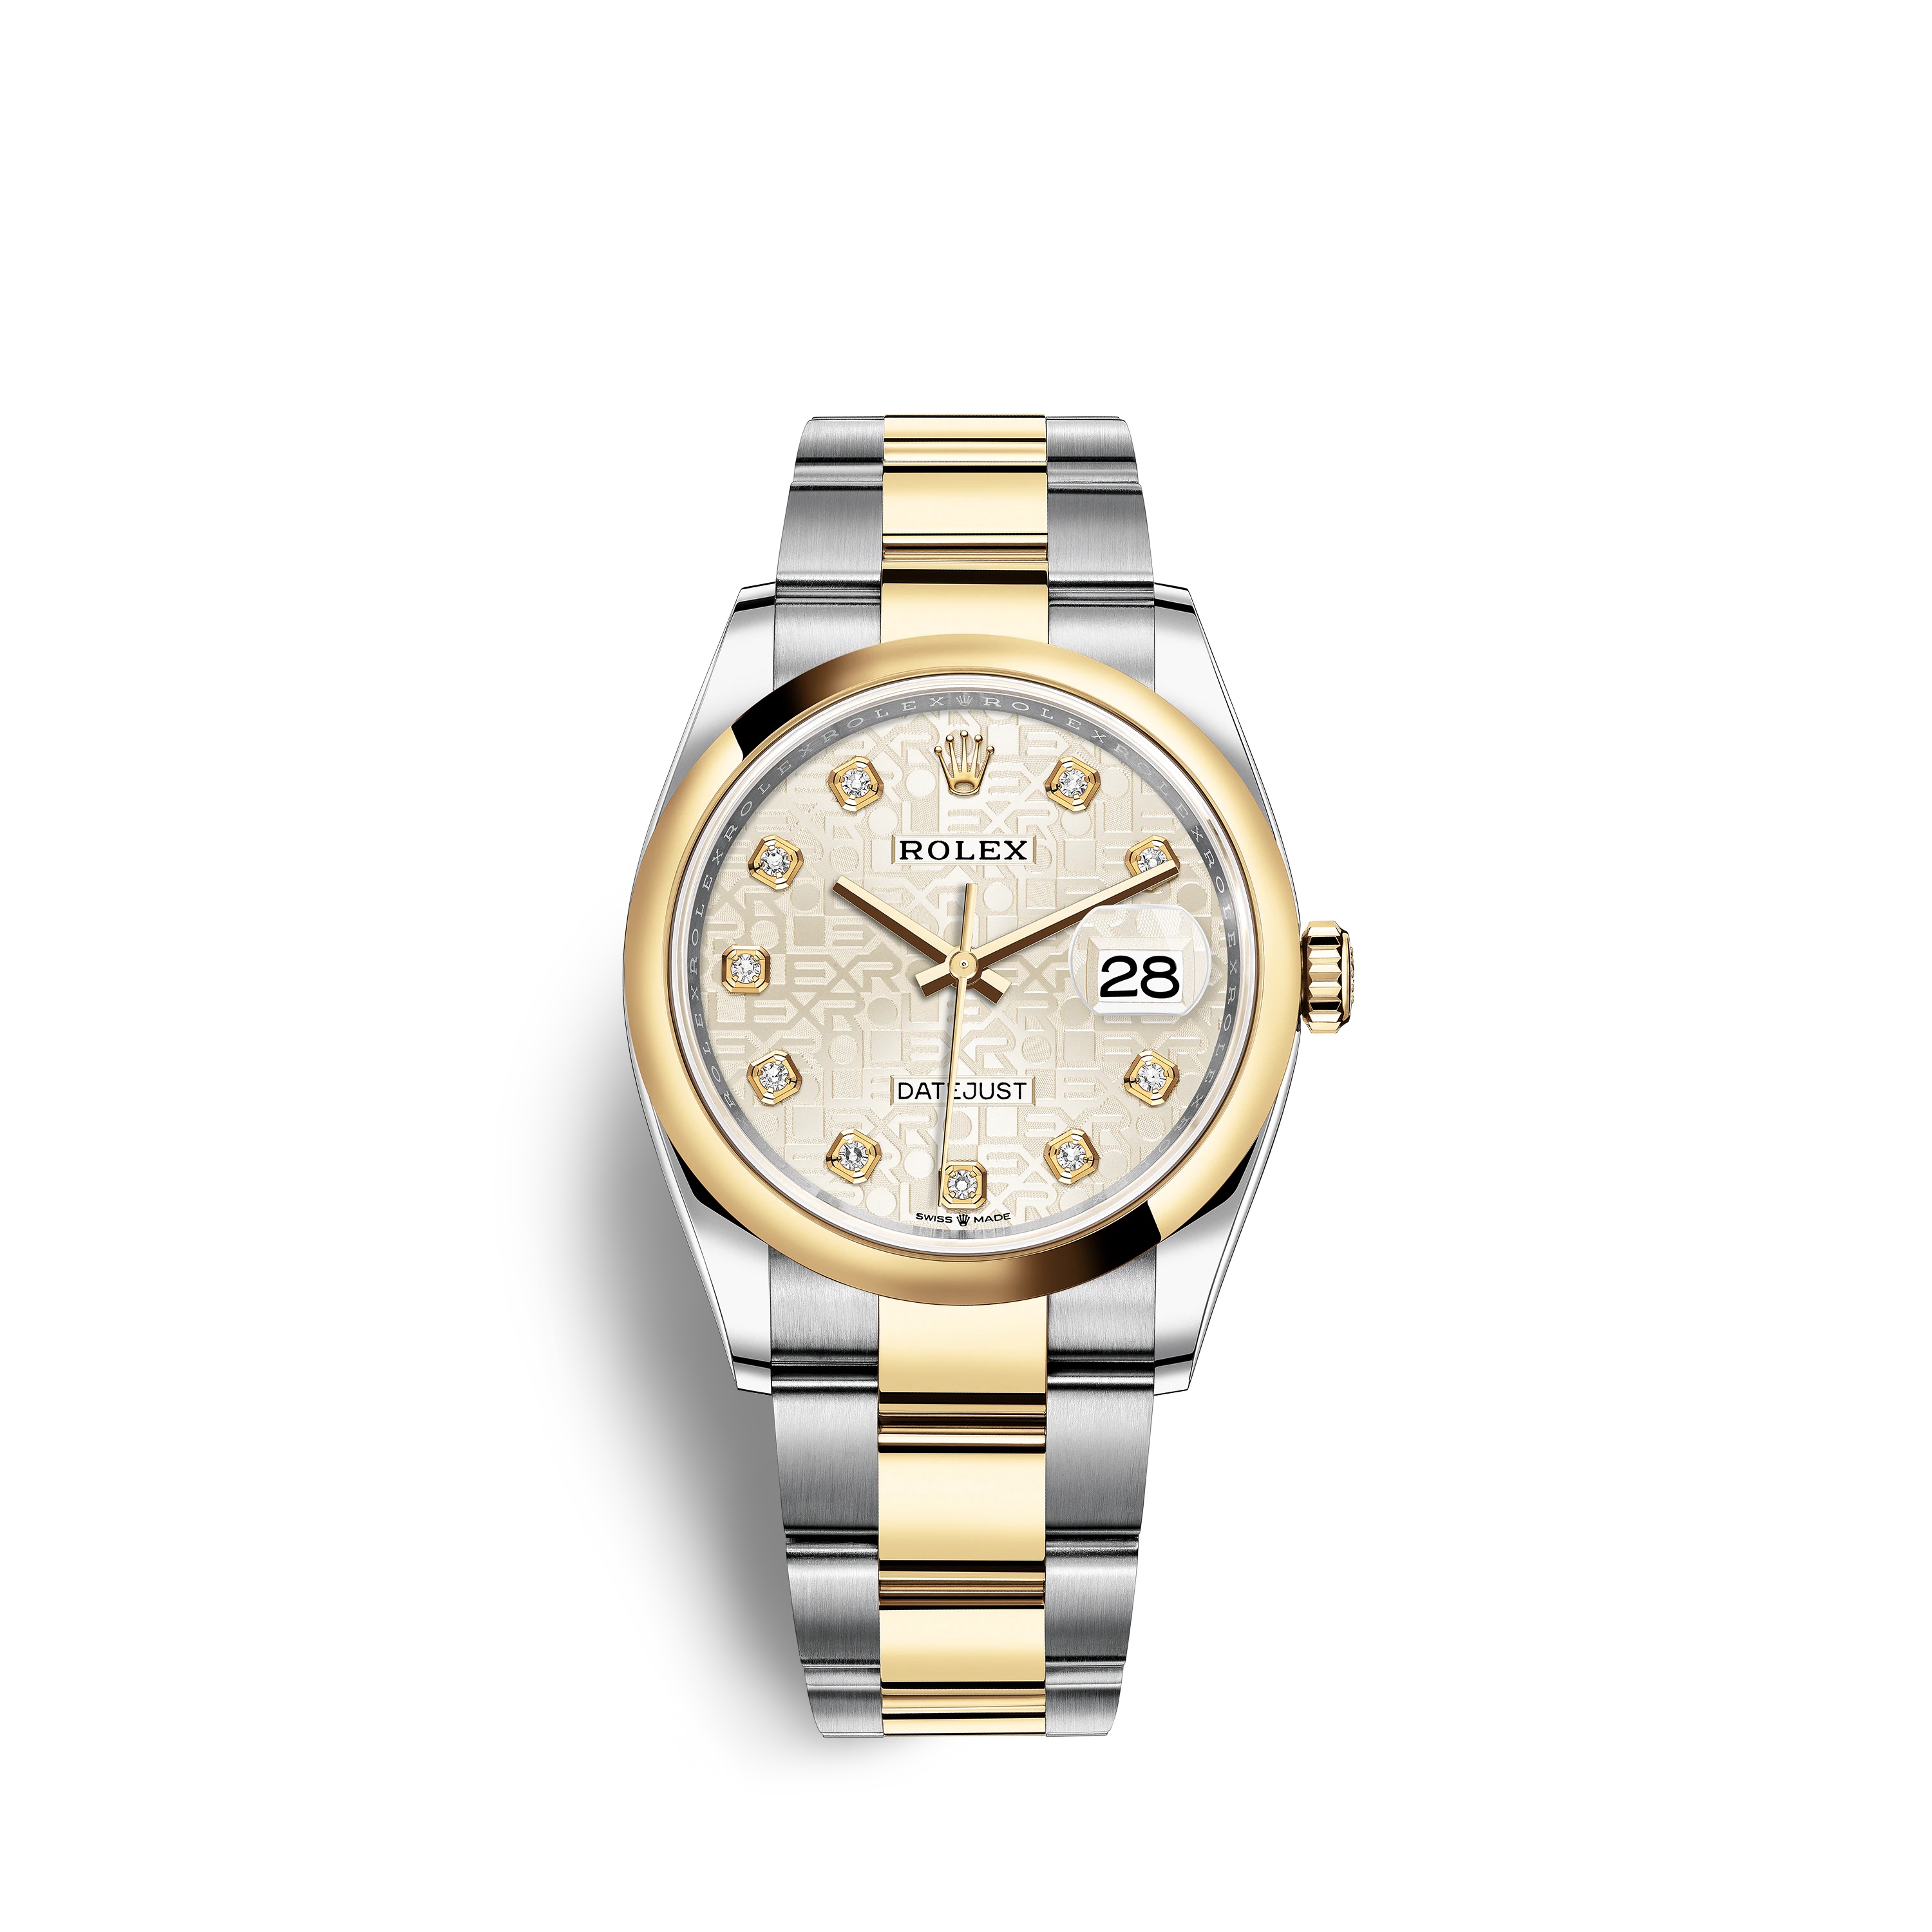 Datejust 36 126203 Gold & Stainless Steel Watch (Silver Jubilee Design Set with Diamonds)